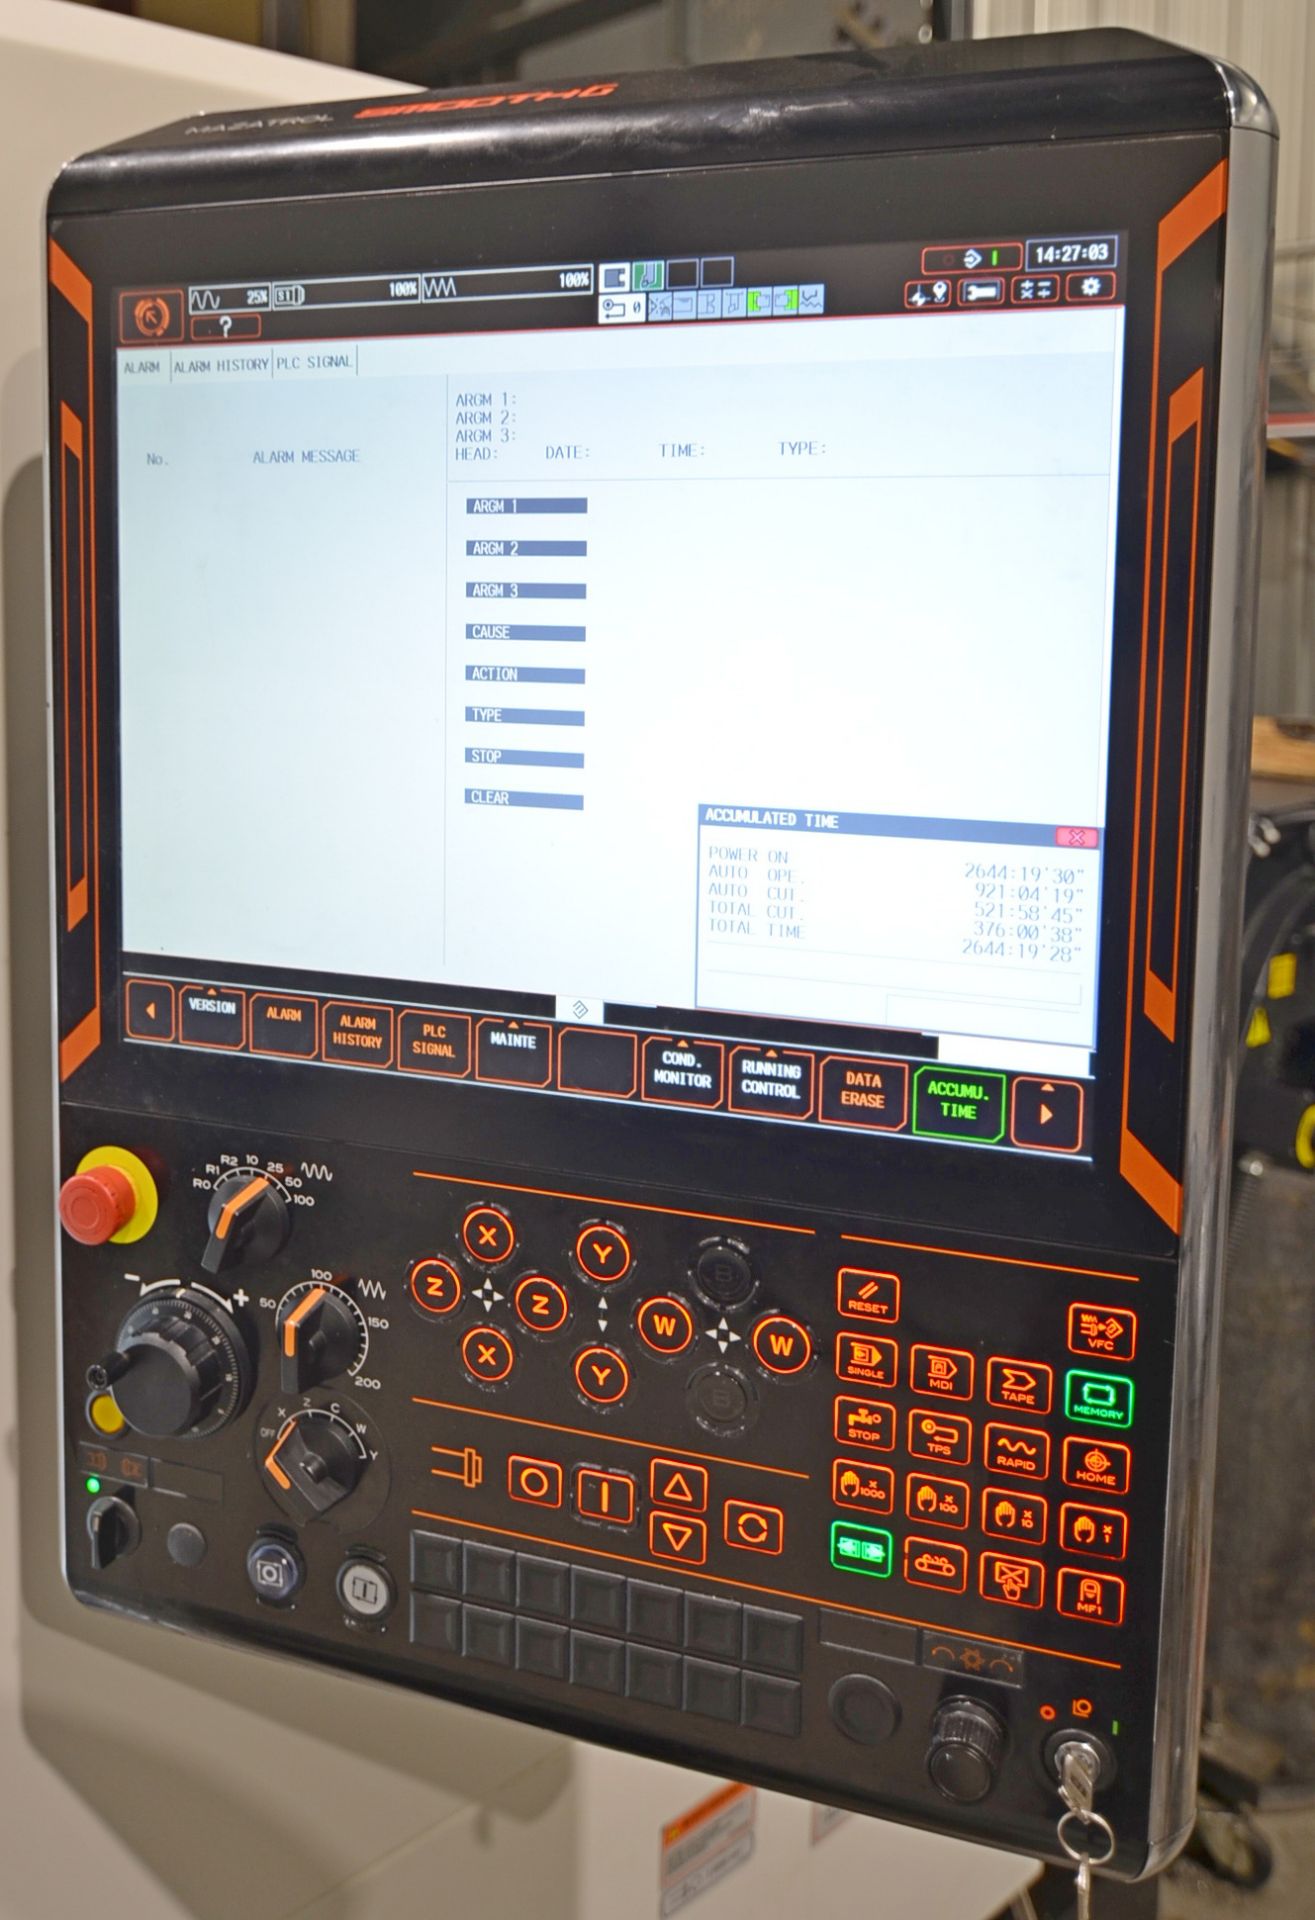 MAZAK (2021) QUICK TURN 200 MSY OPPOSING SPINDLE CNC TURNING CENTER WITH MAZATROL SMOOTHG TOUCH - Image 11 of 15